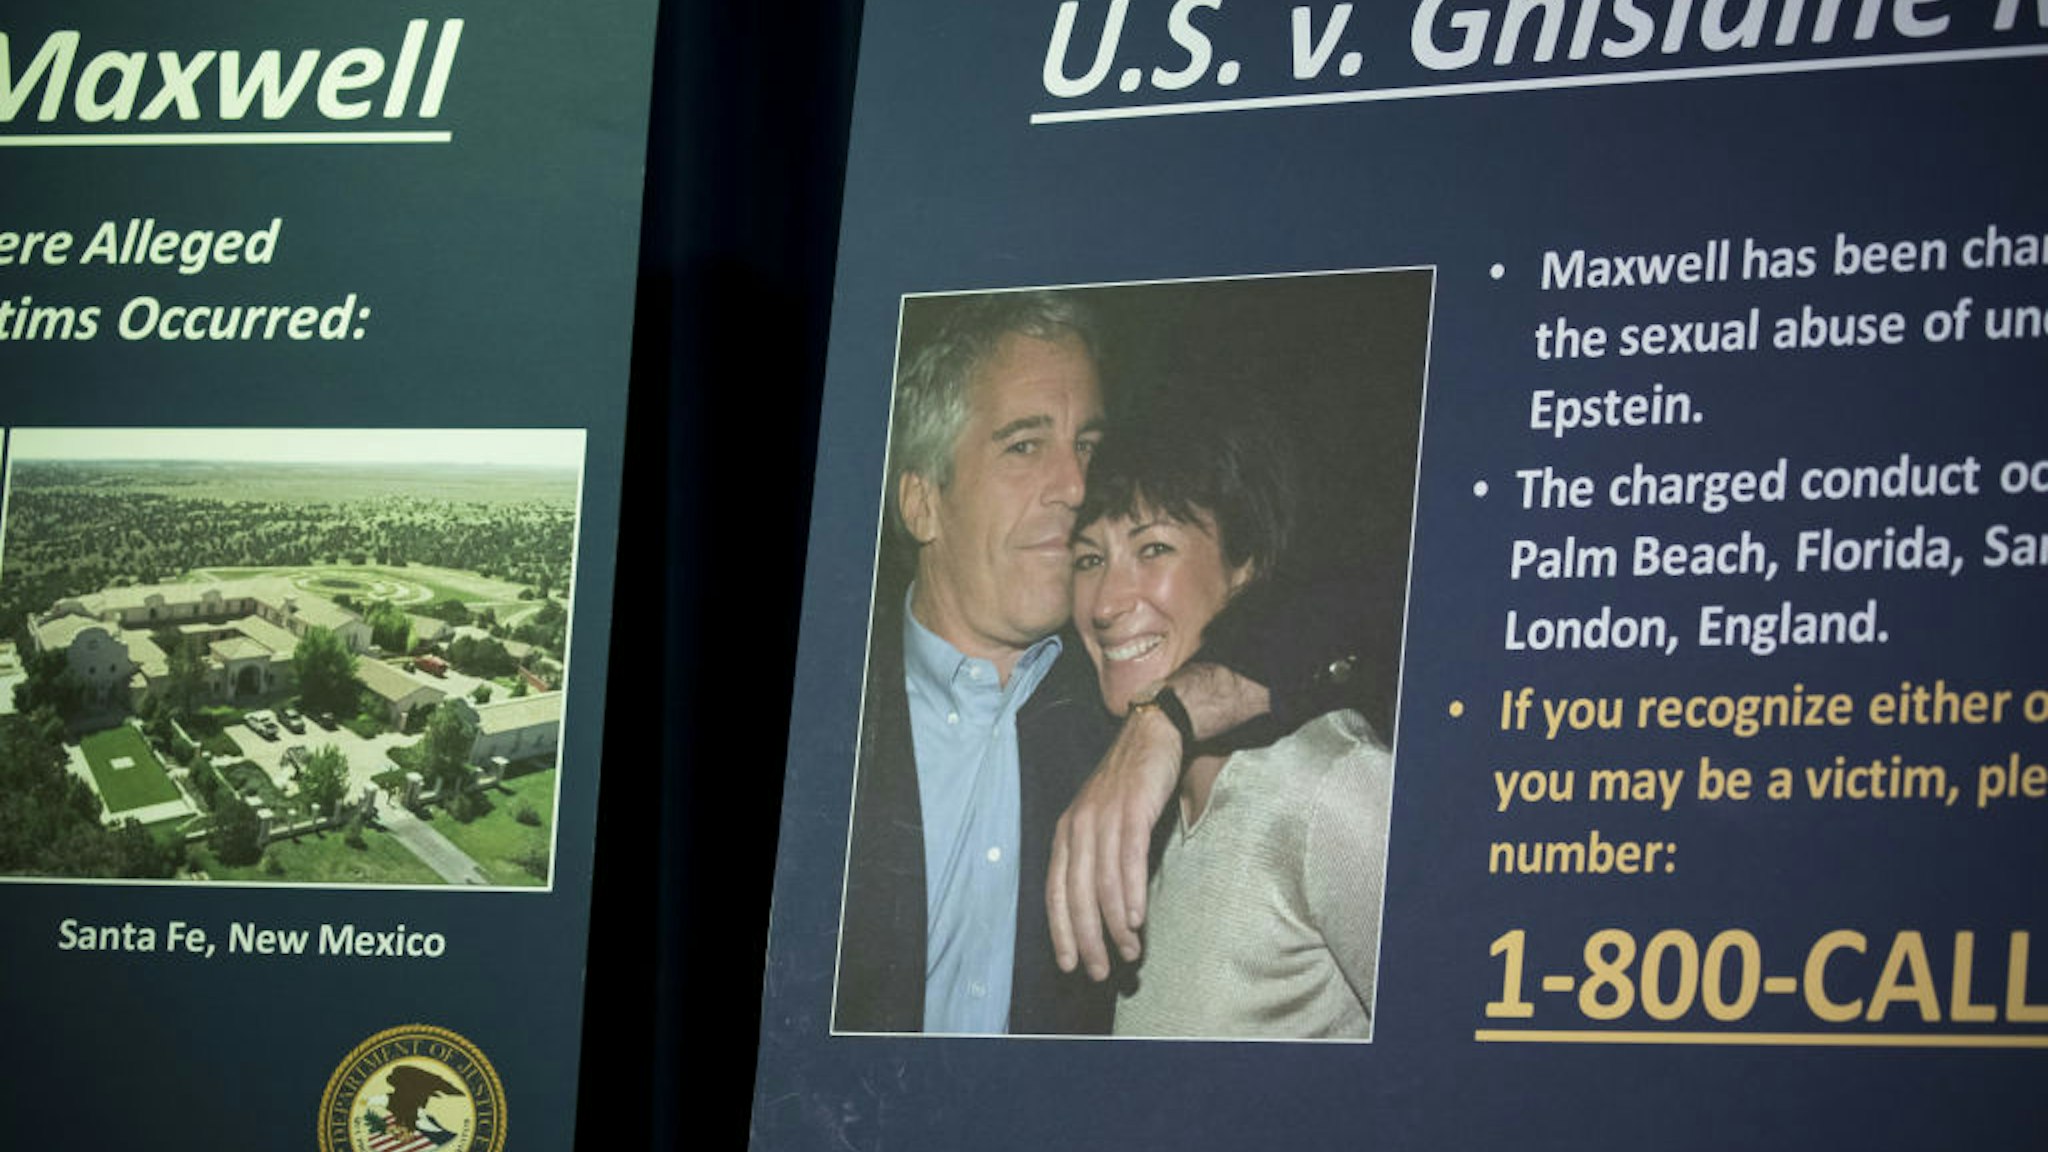 A photograph of Ghislaine Maxwell and Jeffrey Epstein is displayed during a news conference at the U.S. Attorney's Office in New York, U.S., on Thursday, July 2, 2020.